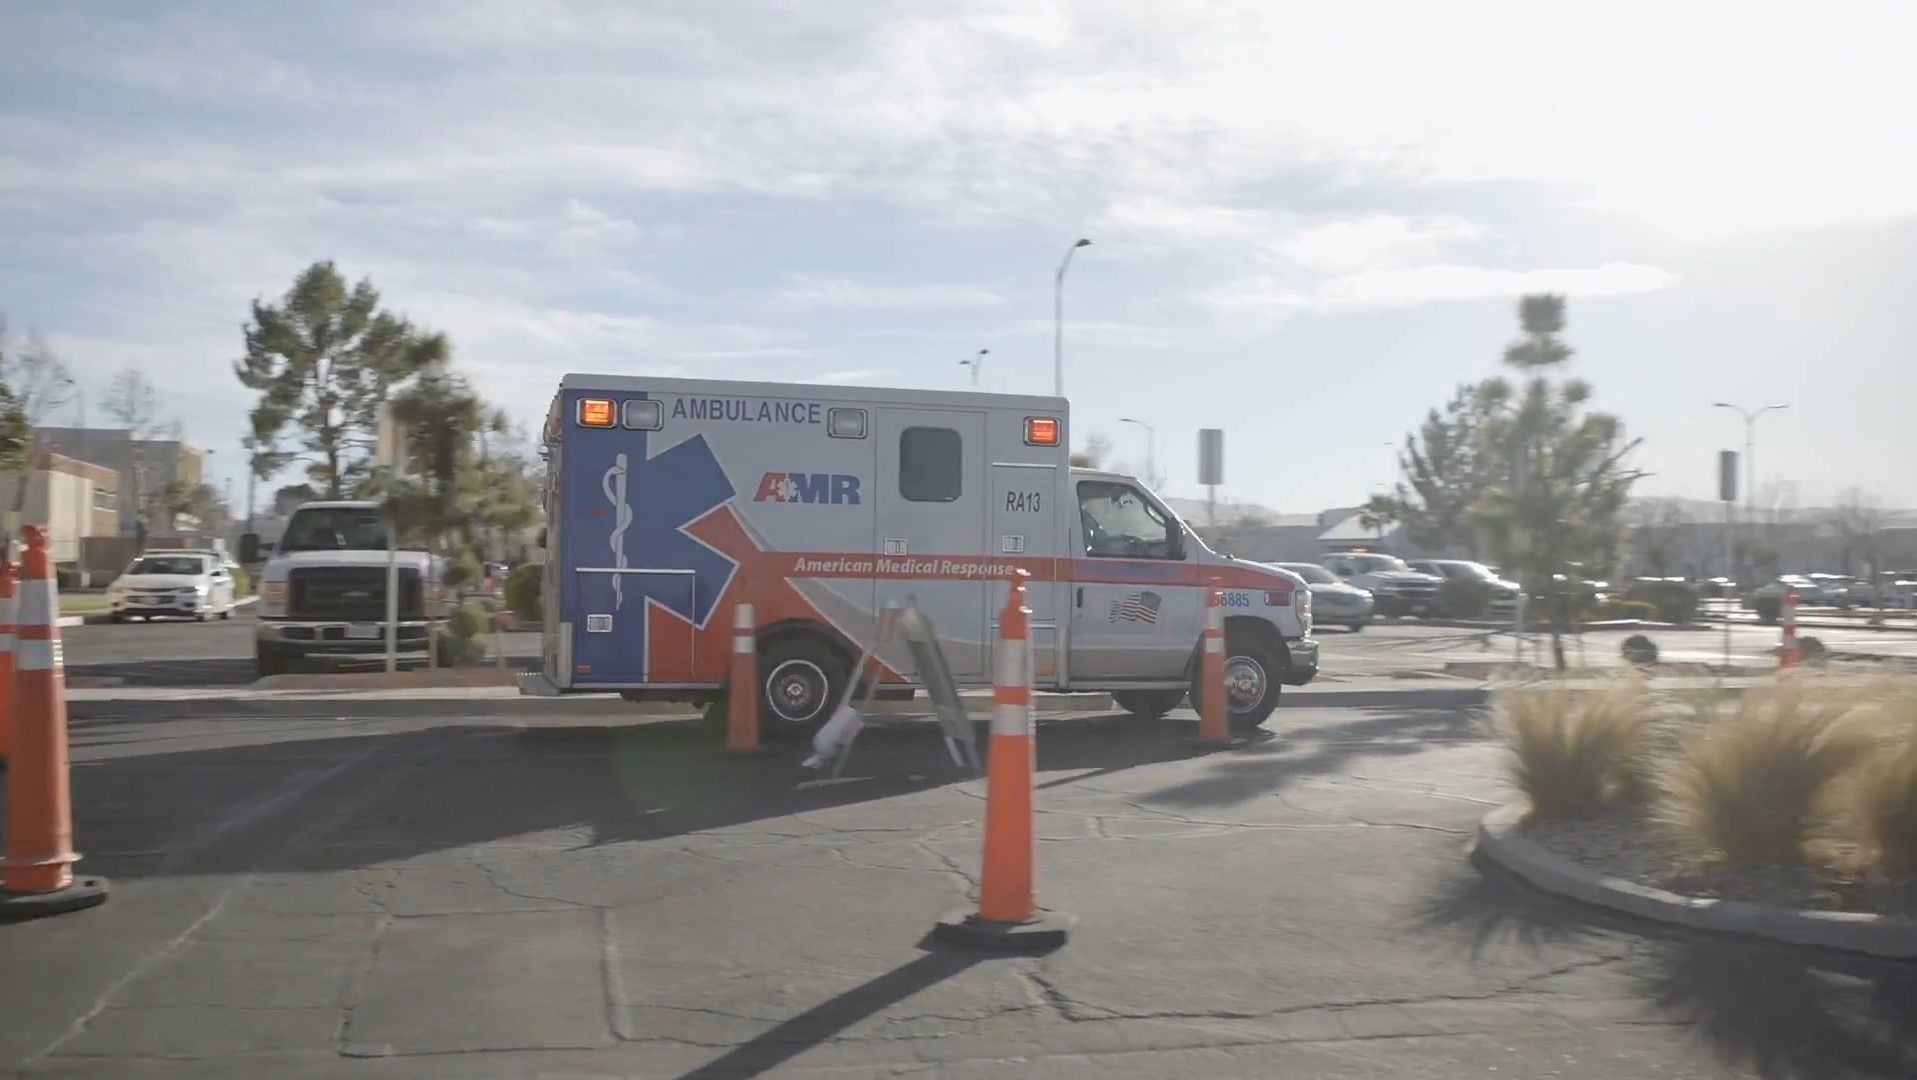 Samaritan’s Purse is preparing to open an Emergency Field Hospital in Lancaster, California, to care for people suffering from COVID-19.